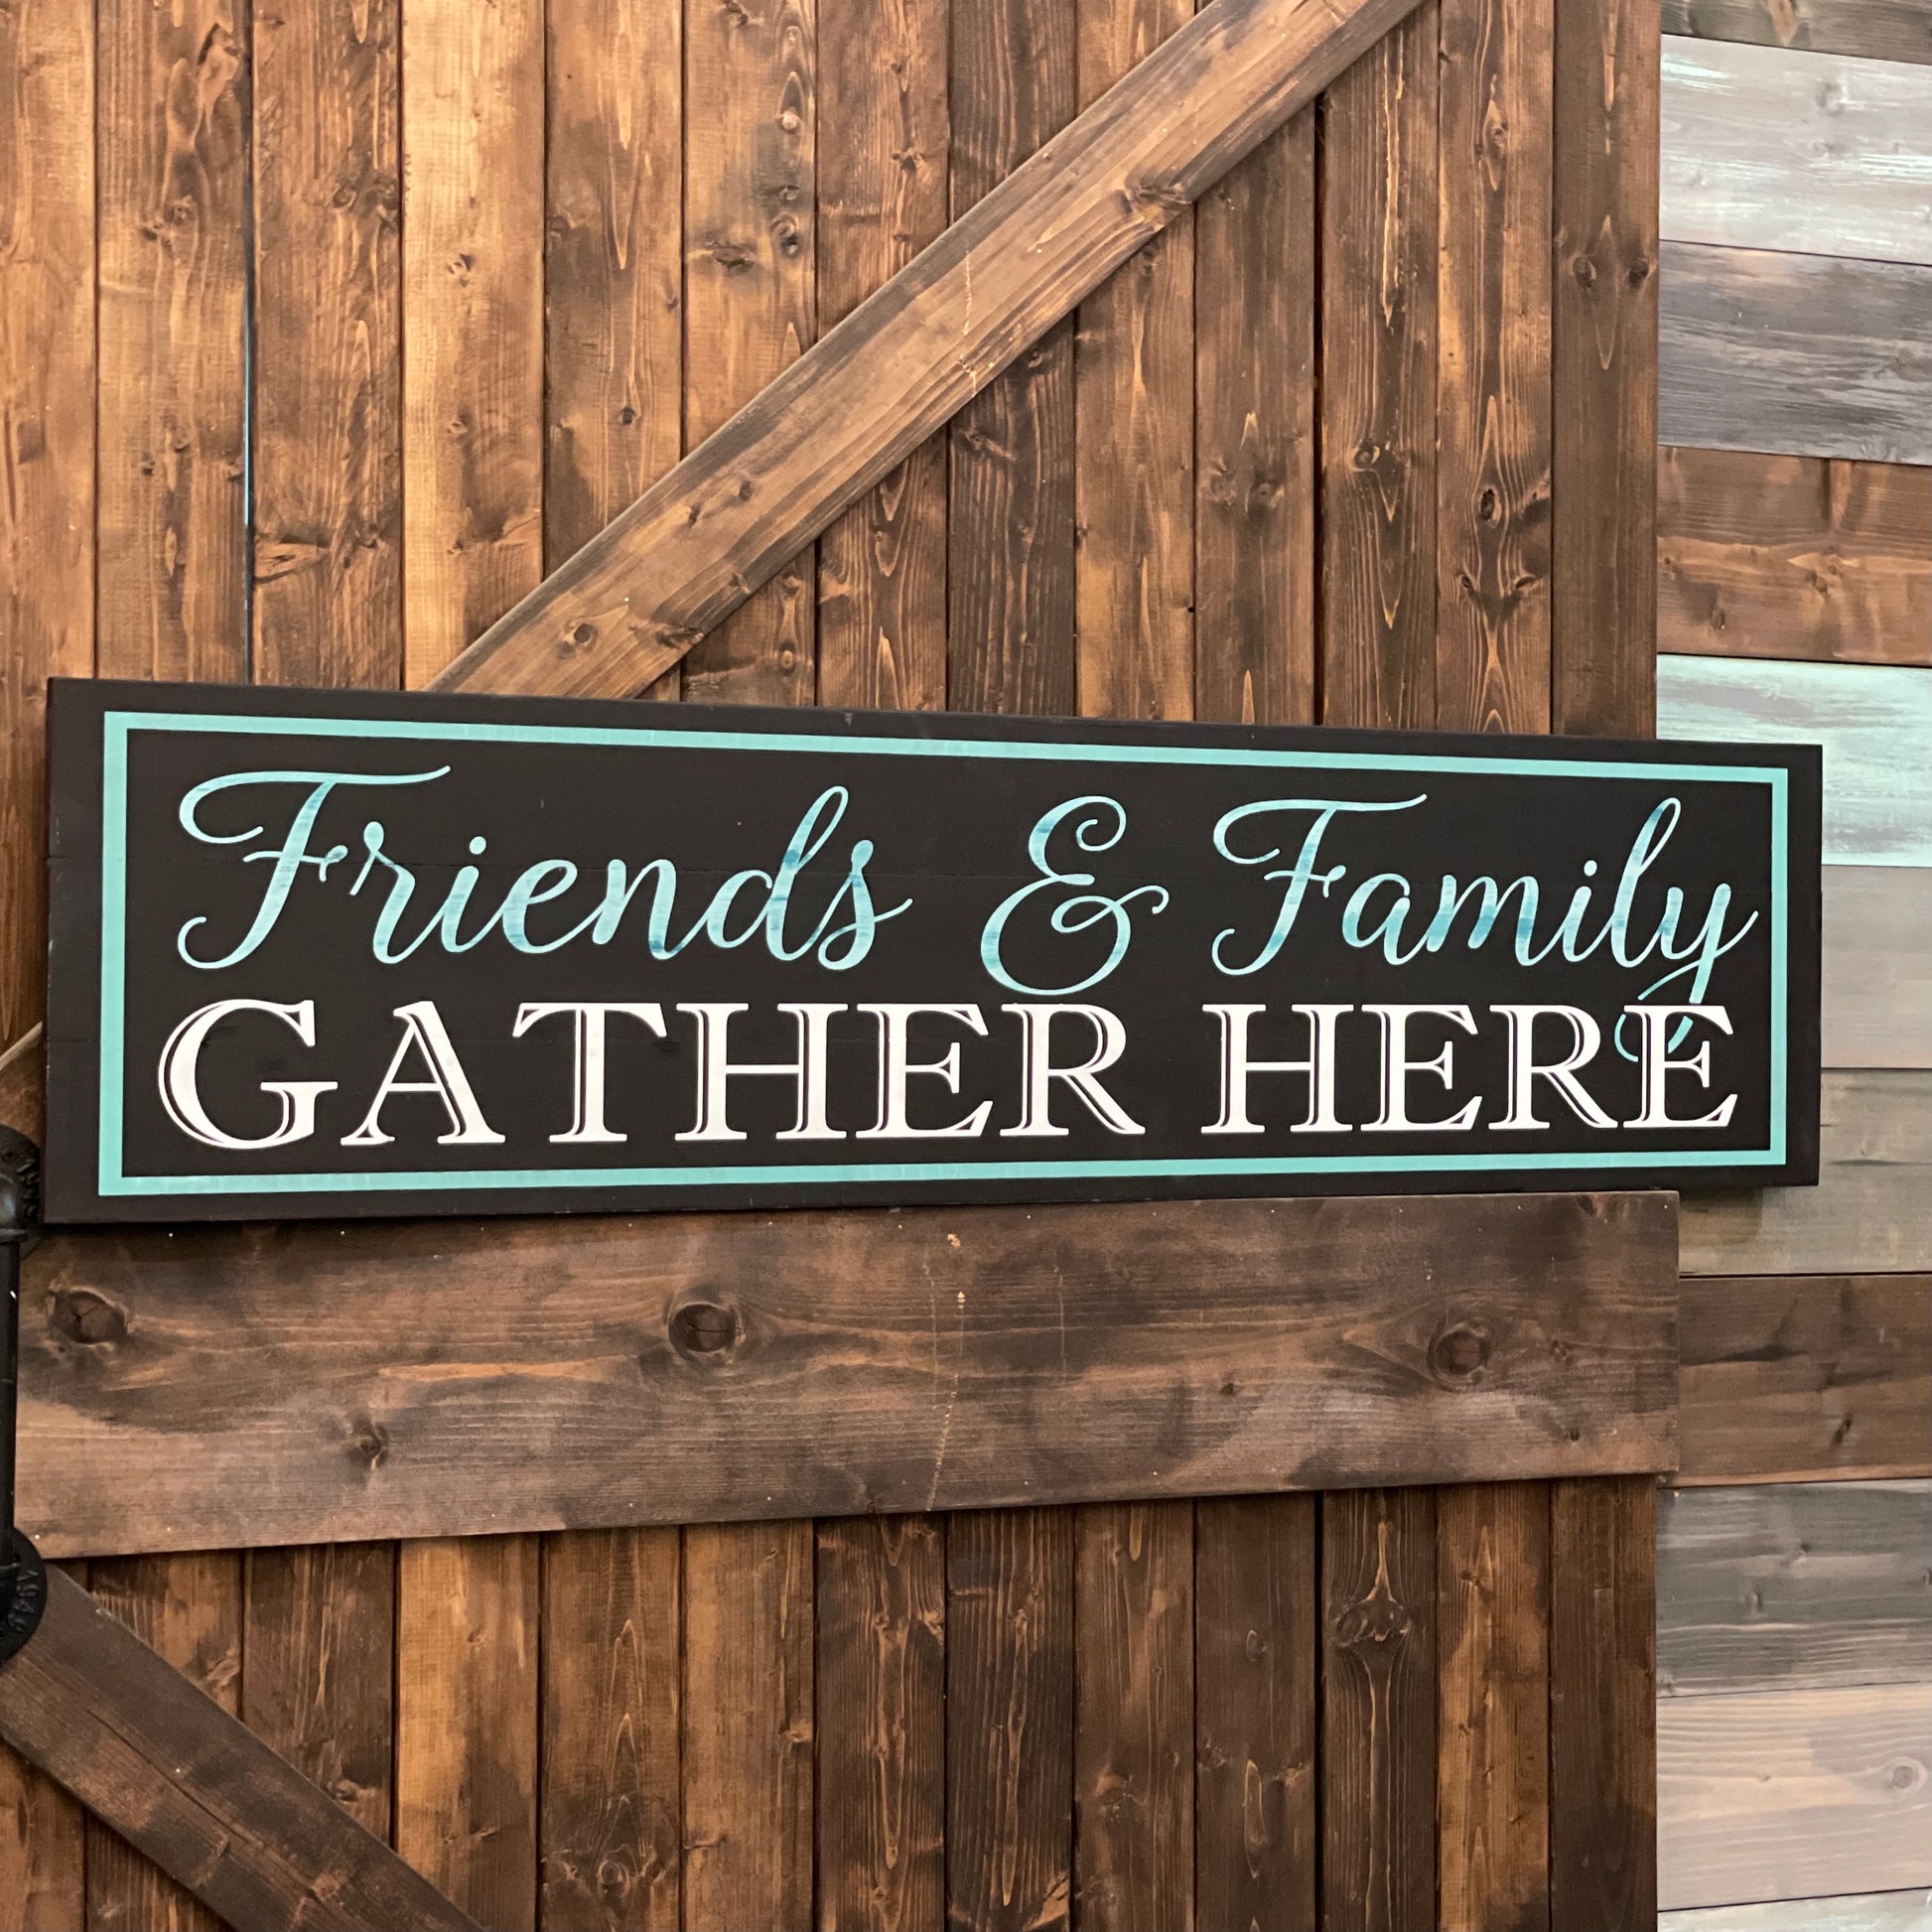 Friends & Family Gather Here: PLANK DESIGN - Paisley Grace Makery